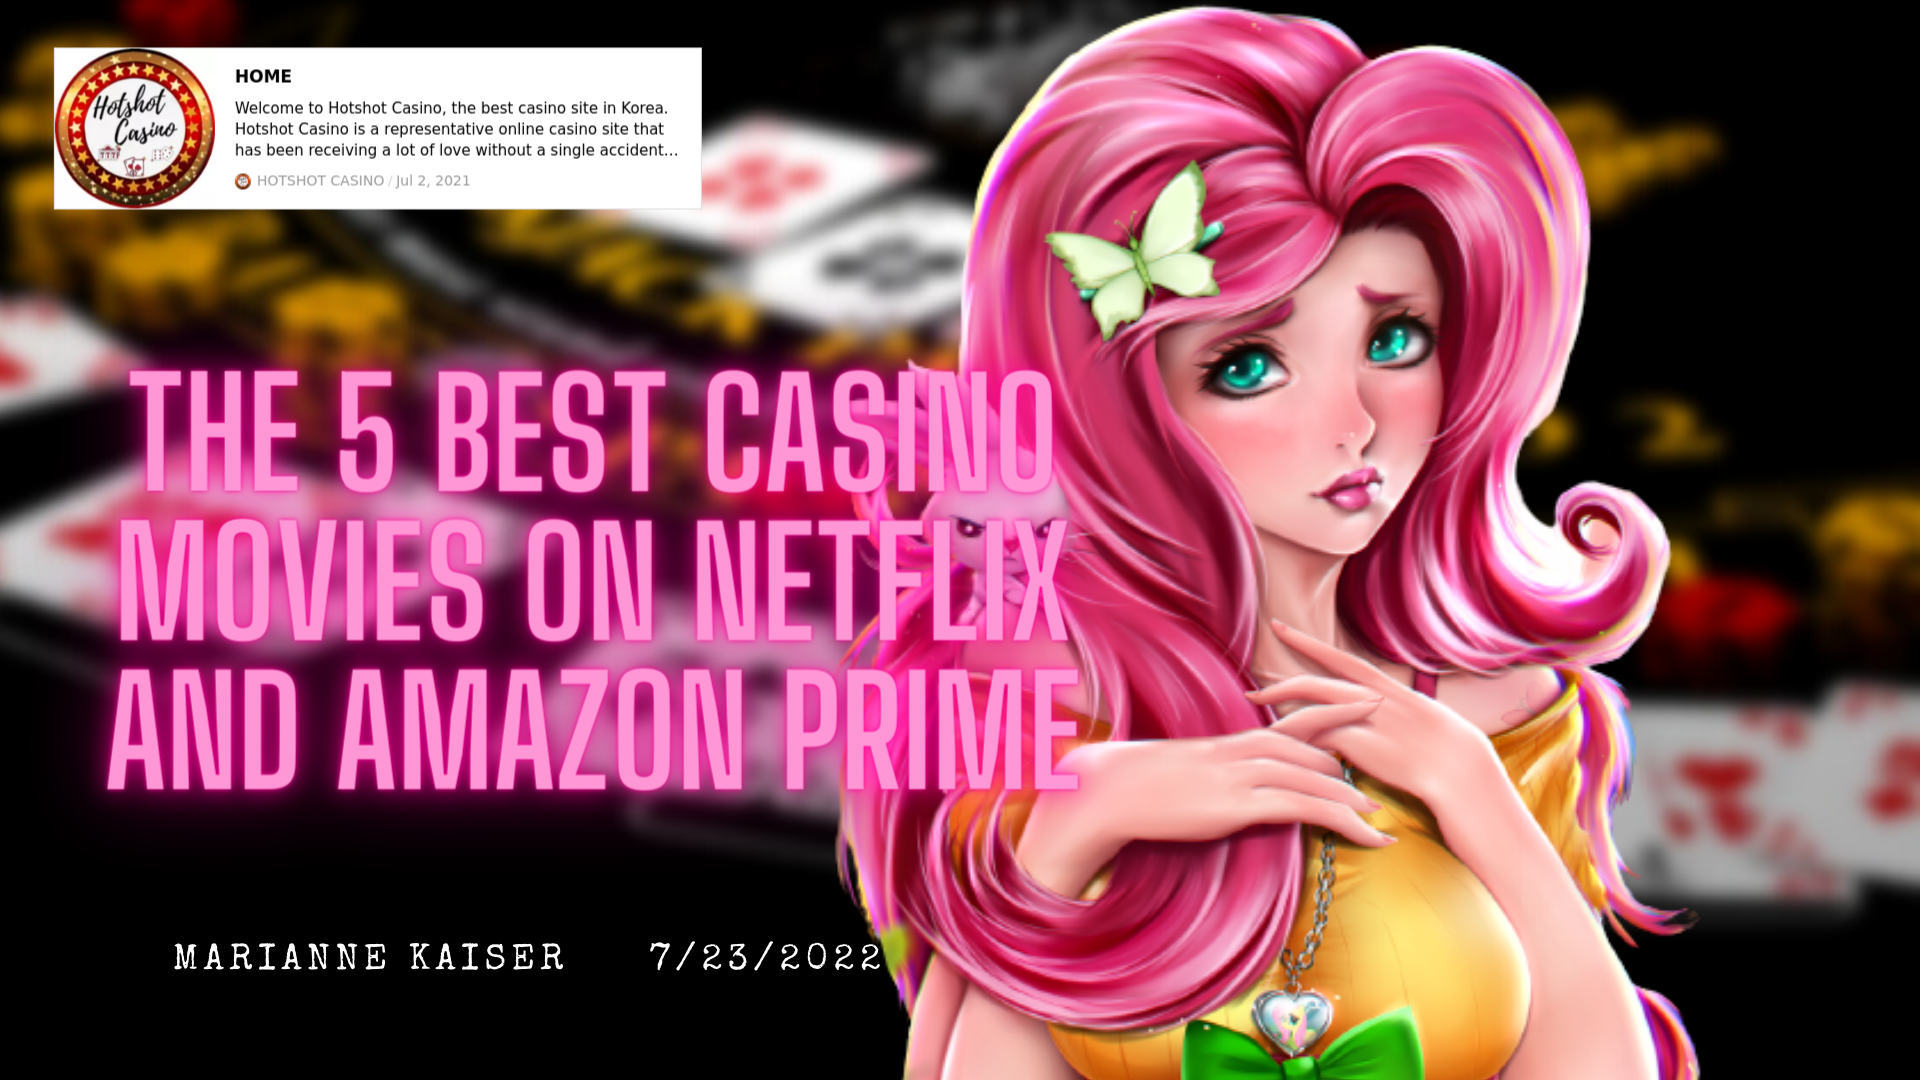 The 5 Best Casino Movies on Netflix and Amazon Prime